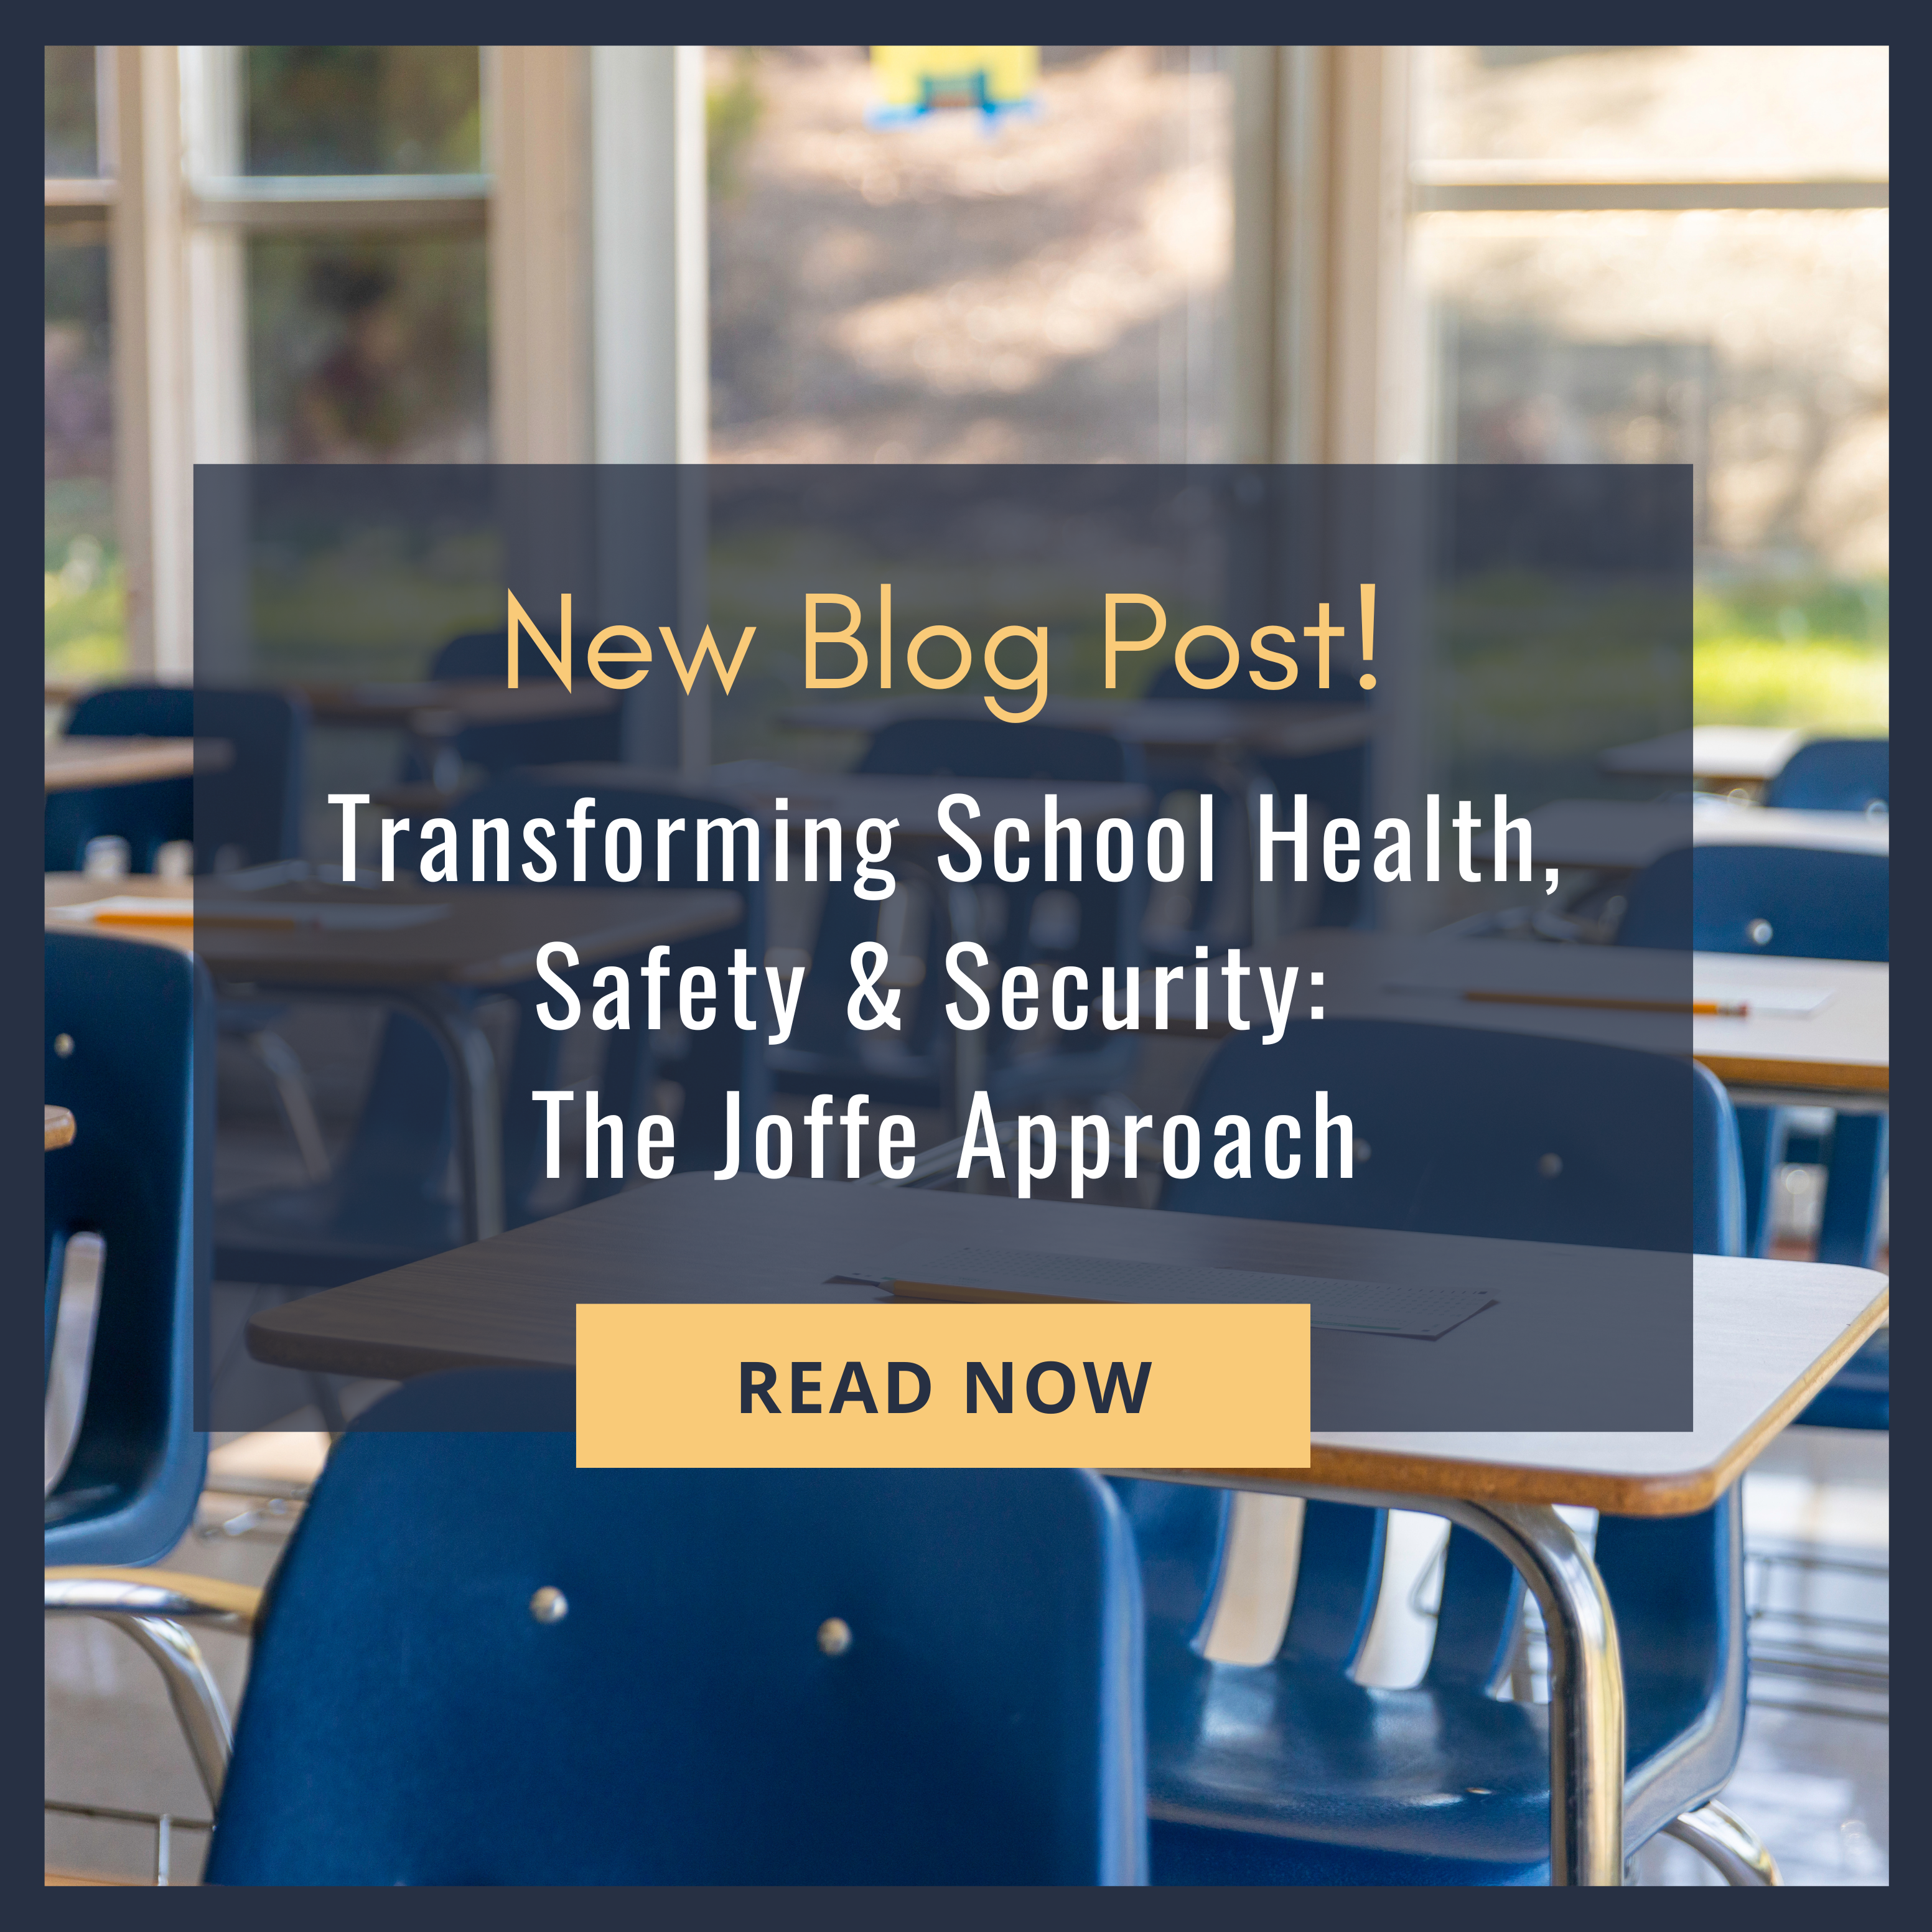 Transforming School Health, Safety & Security: The Joffe Approach